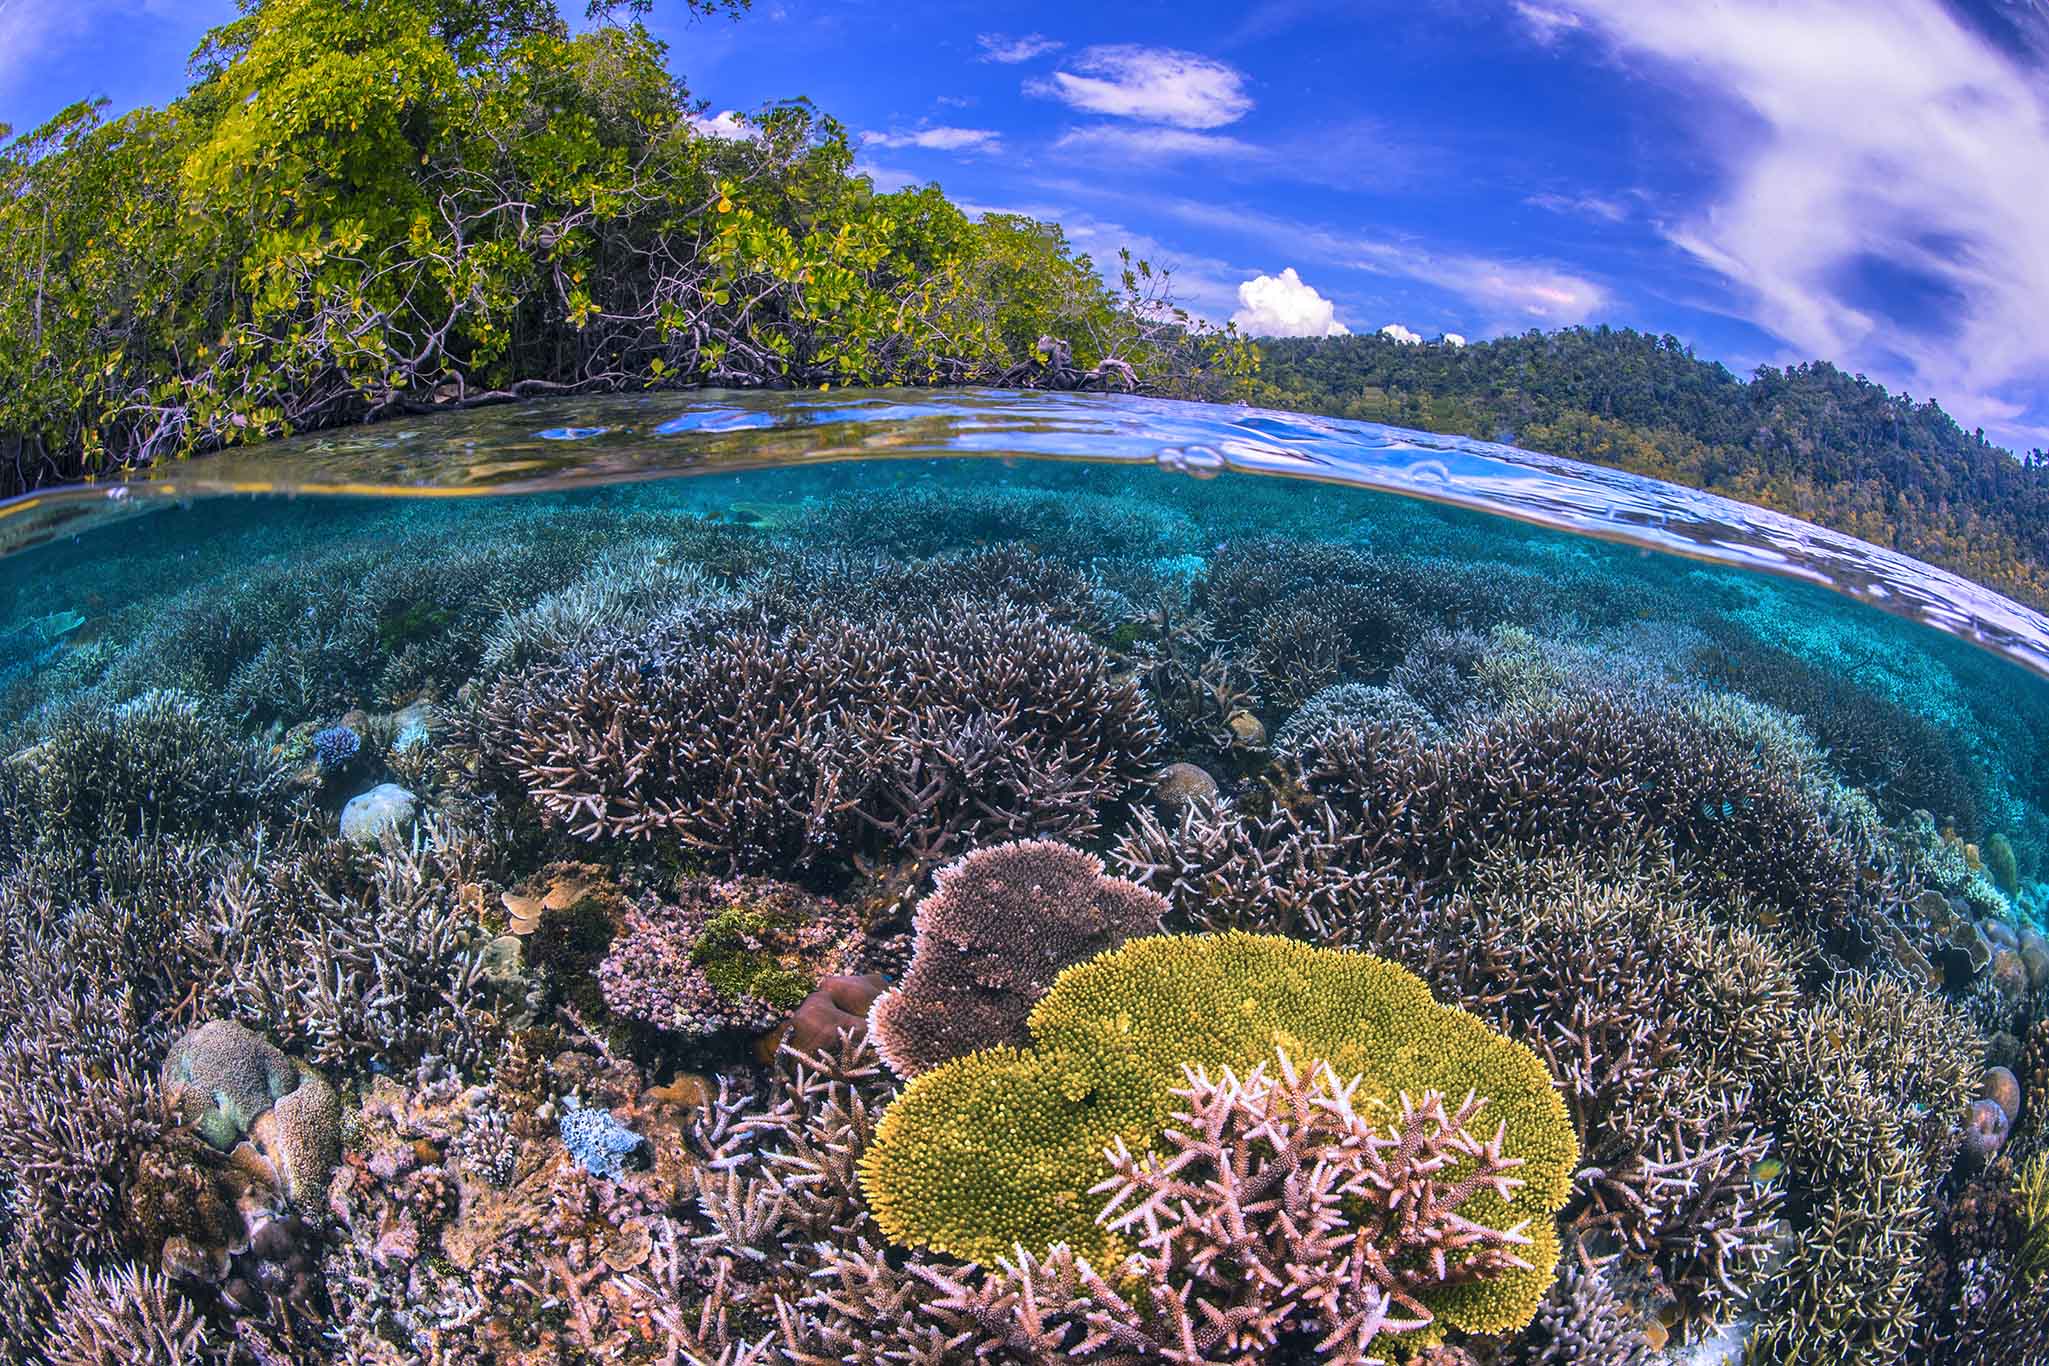 Raja Ampat is as spectacular above the water as it is below. But climate departure in the tropics is swiftly approaching, ushering in a new era where the abnormal has become normal and extremes are expected (Source: Michael Aw)